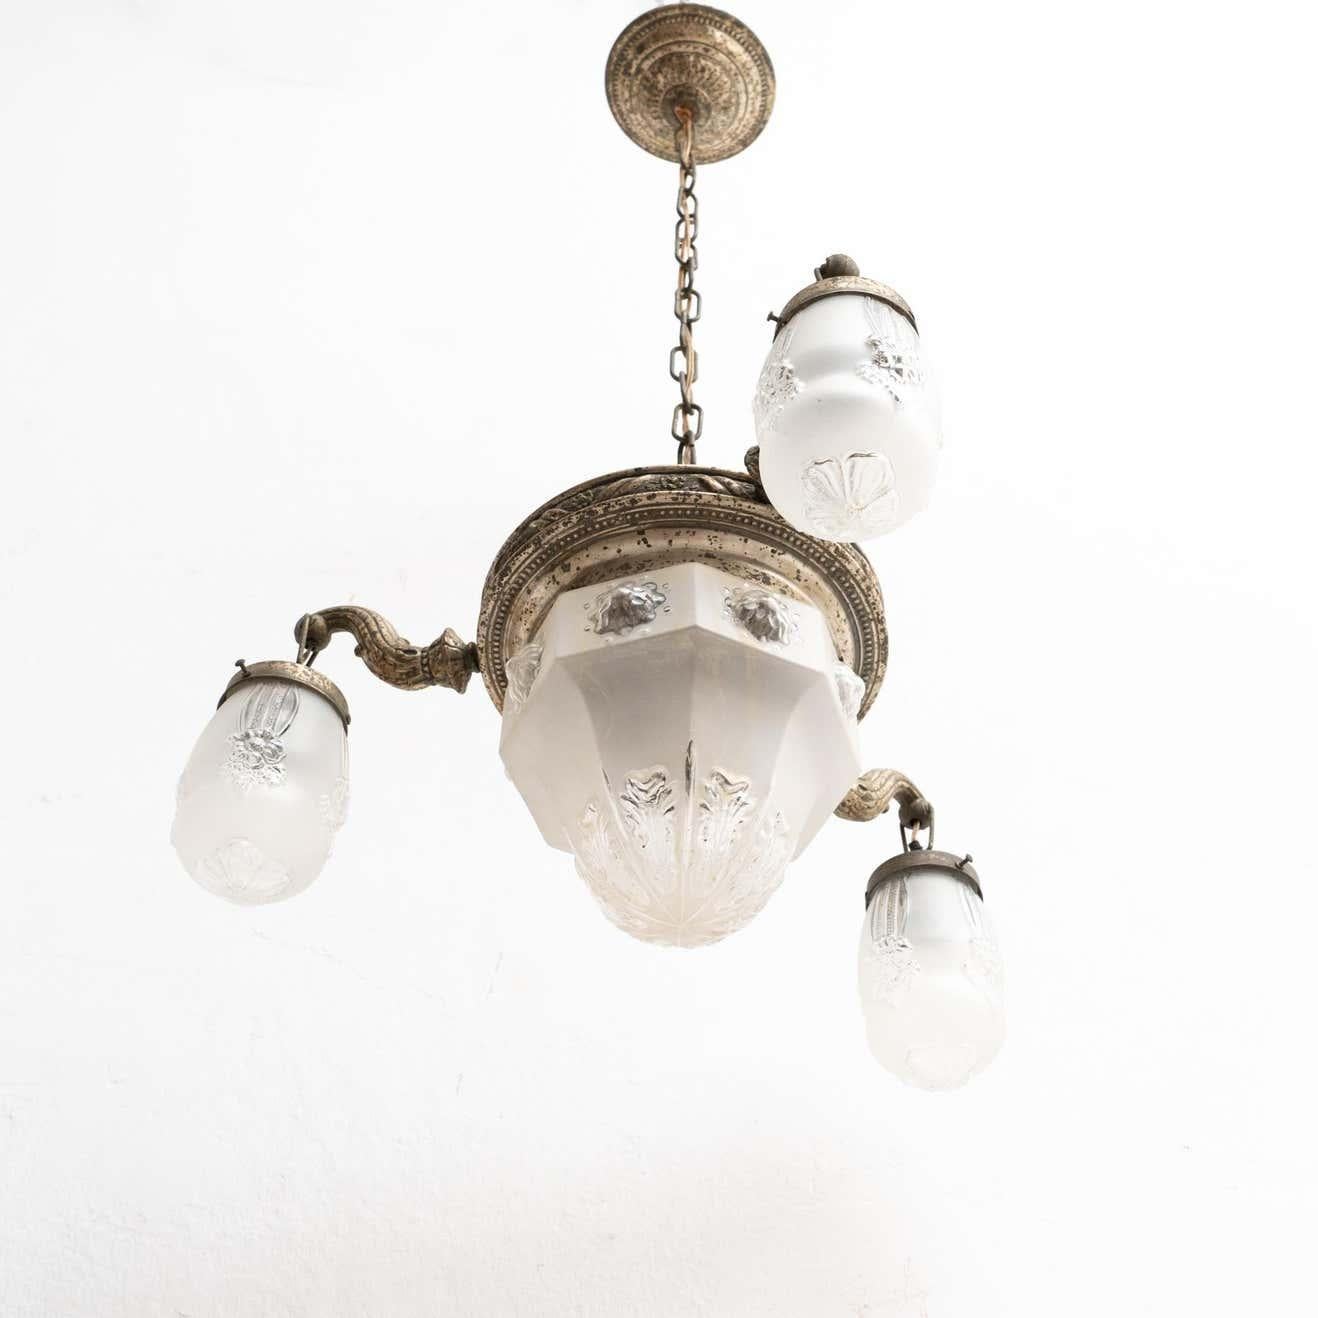 Vintage French Metal and Glass Ceiling Lamp, circa, 1930 For Sale 8